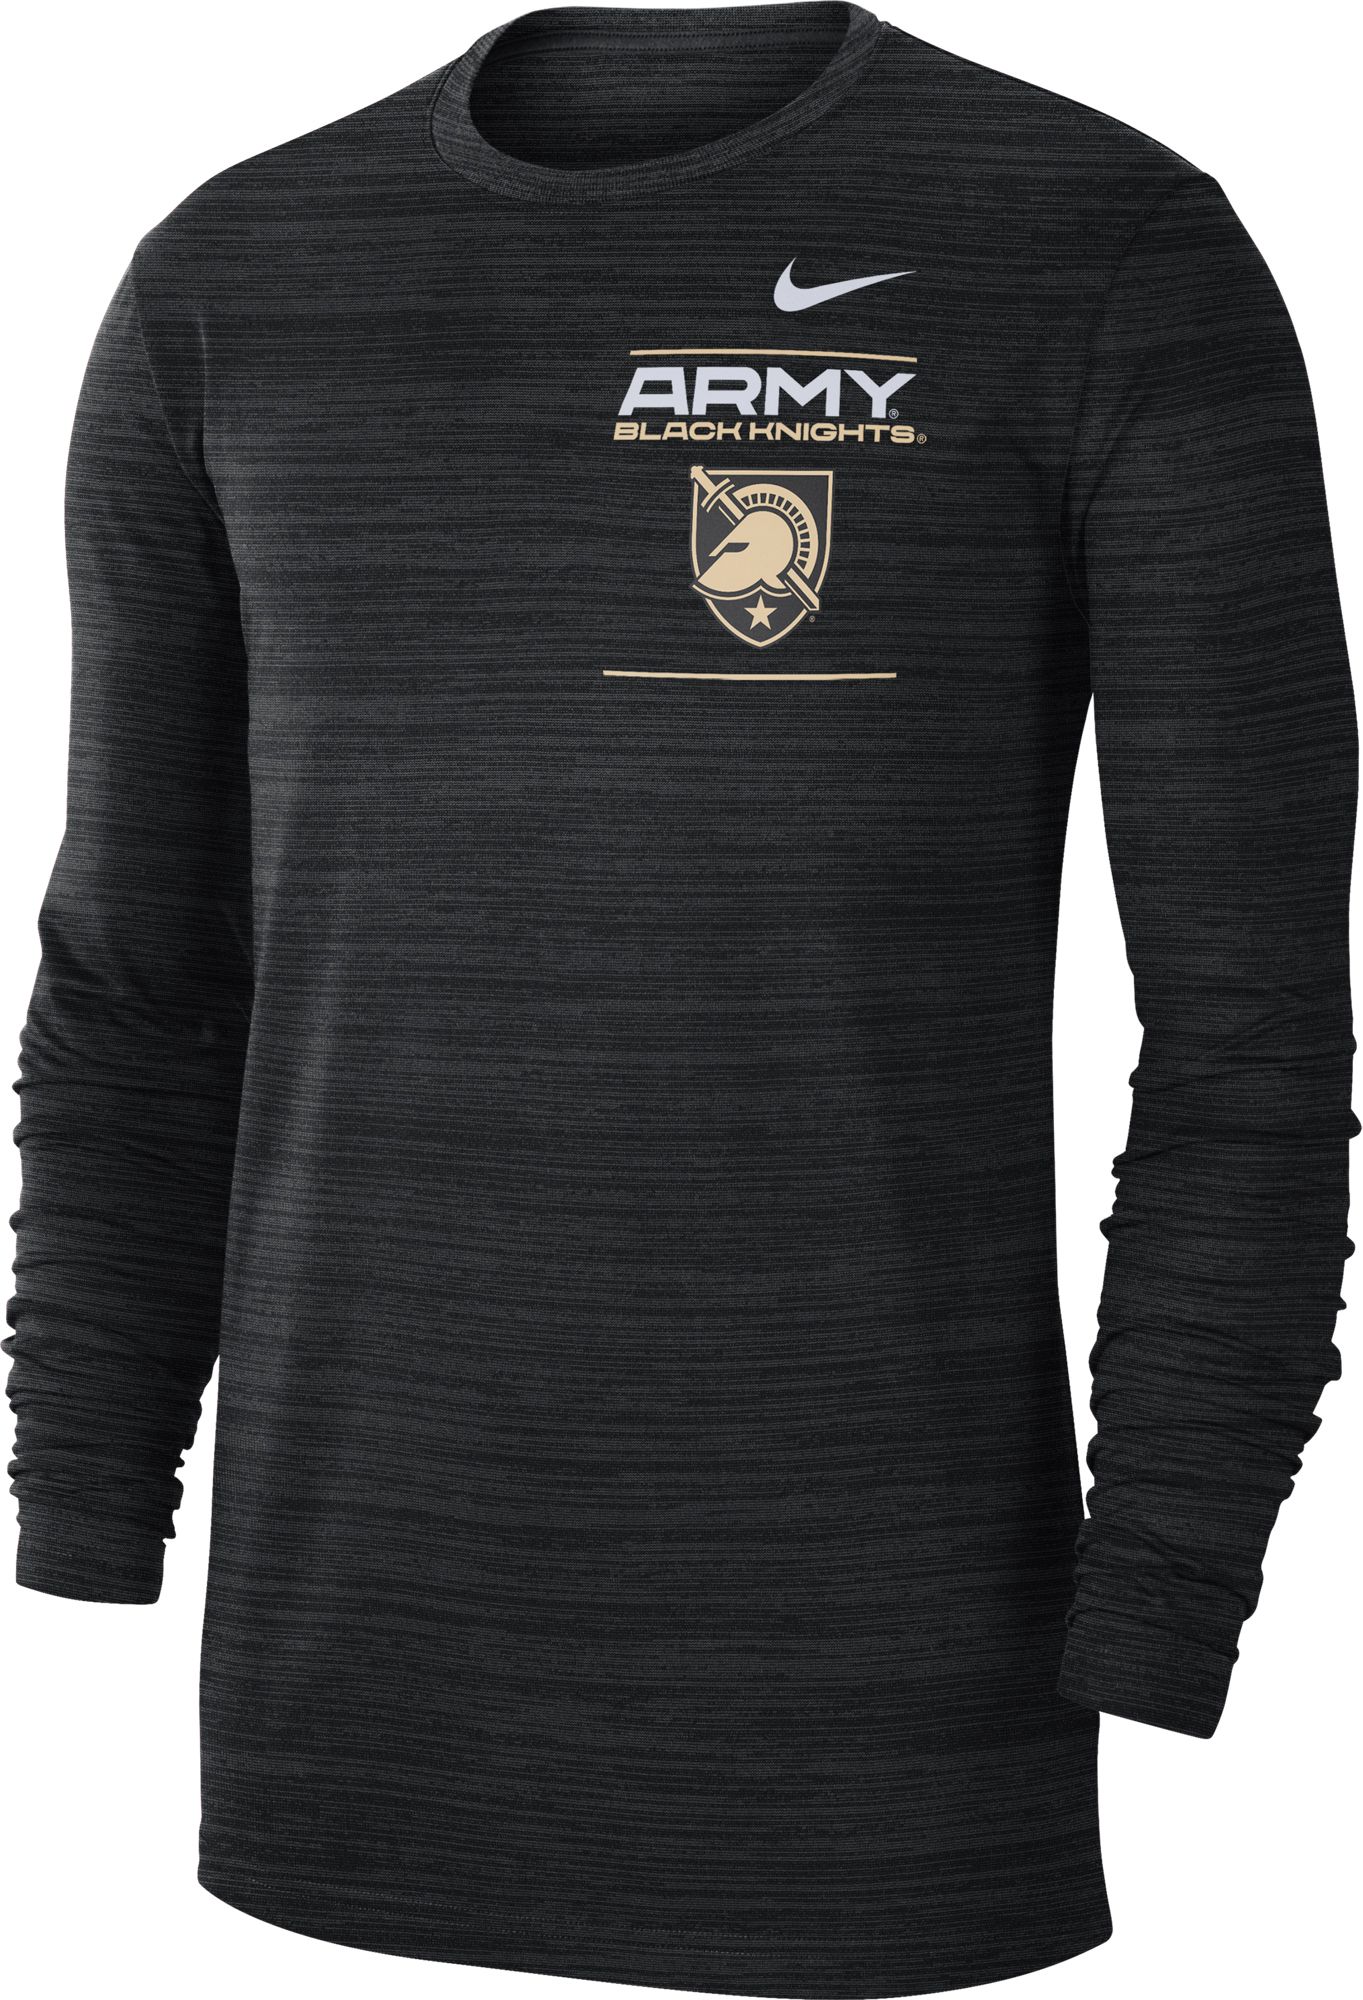 Nike / Men's Army West Point Black Knights Dri-FIT Velocity Football  Sideline Army Black Long Sleeve T-Shirt